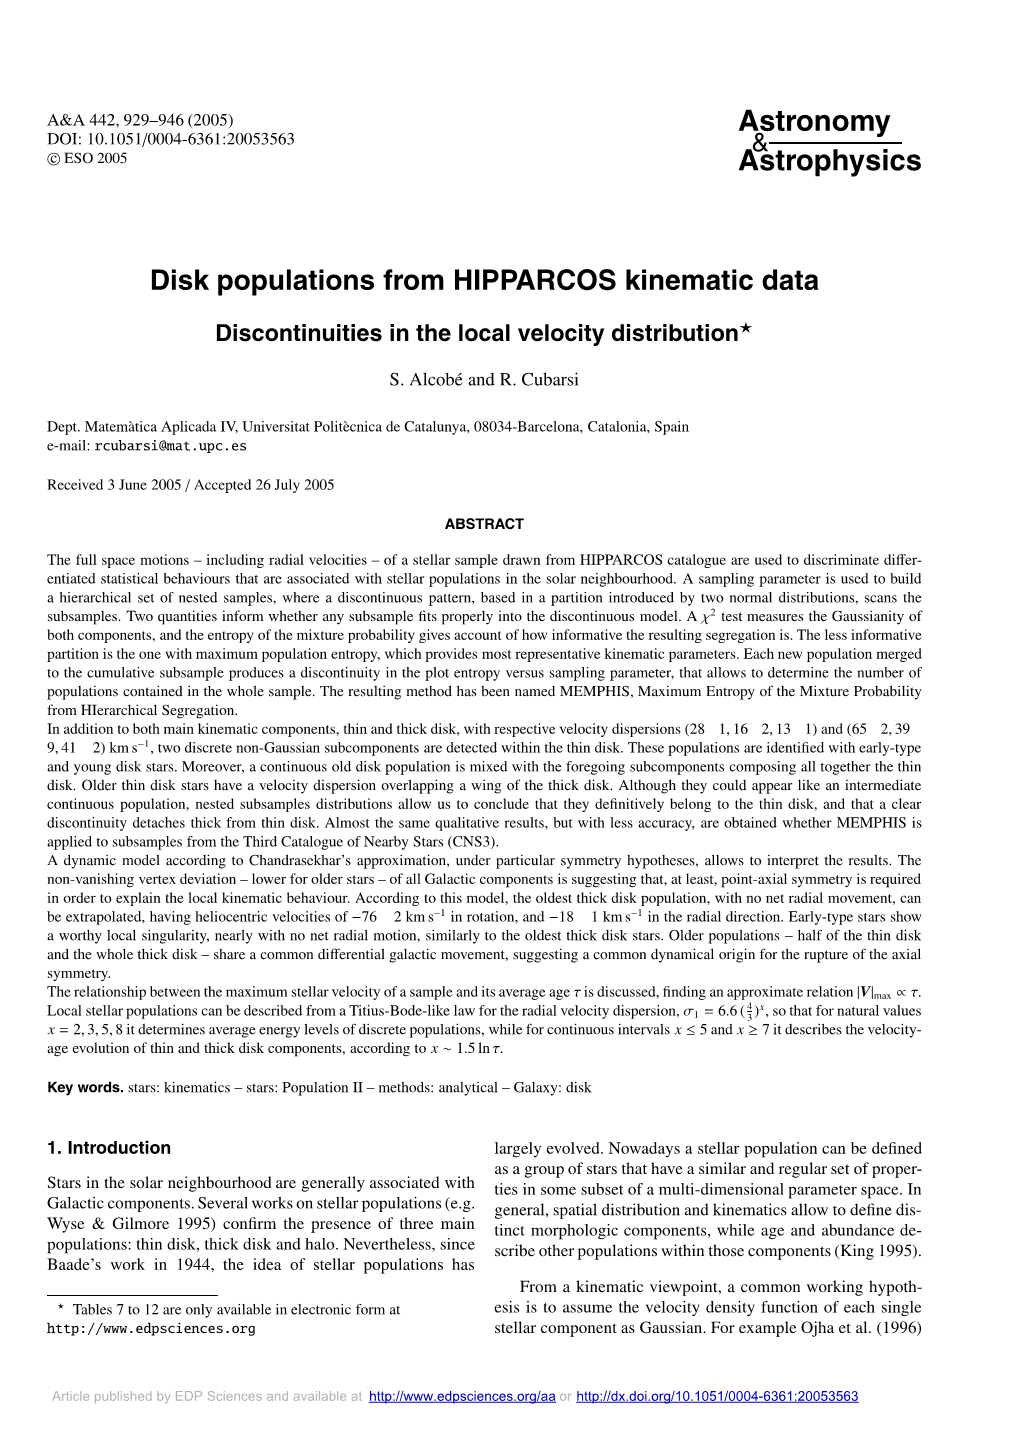 Disk Populations from HIPPARCOS Kinematic Data